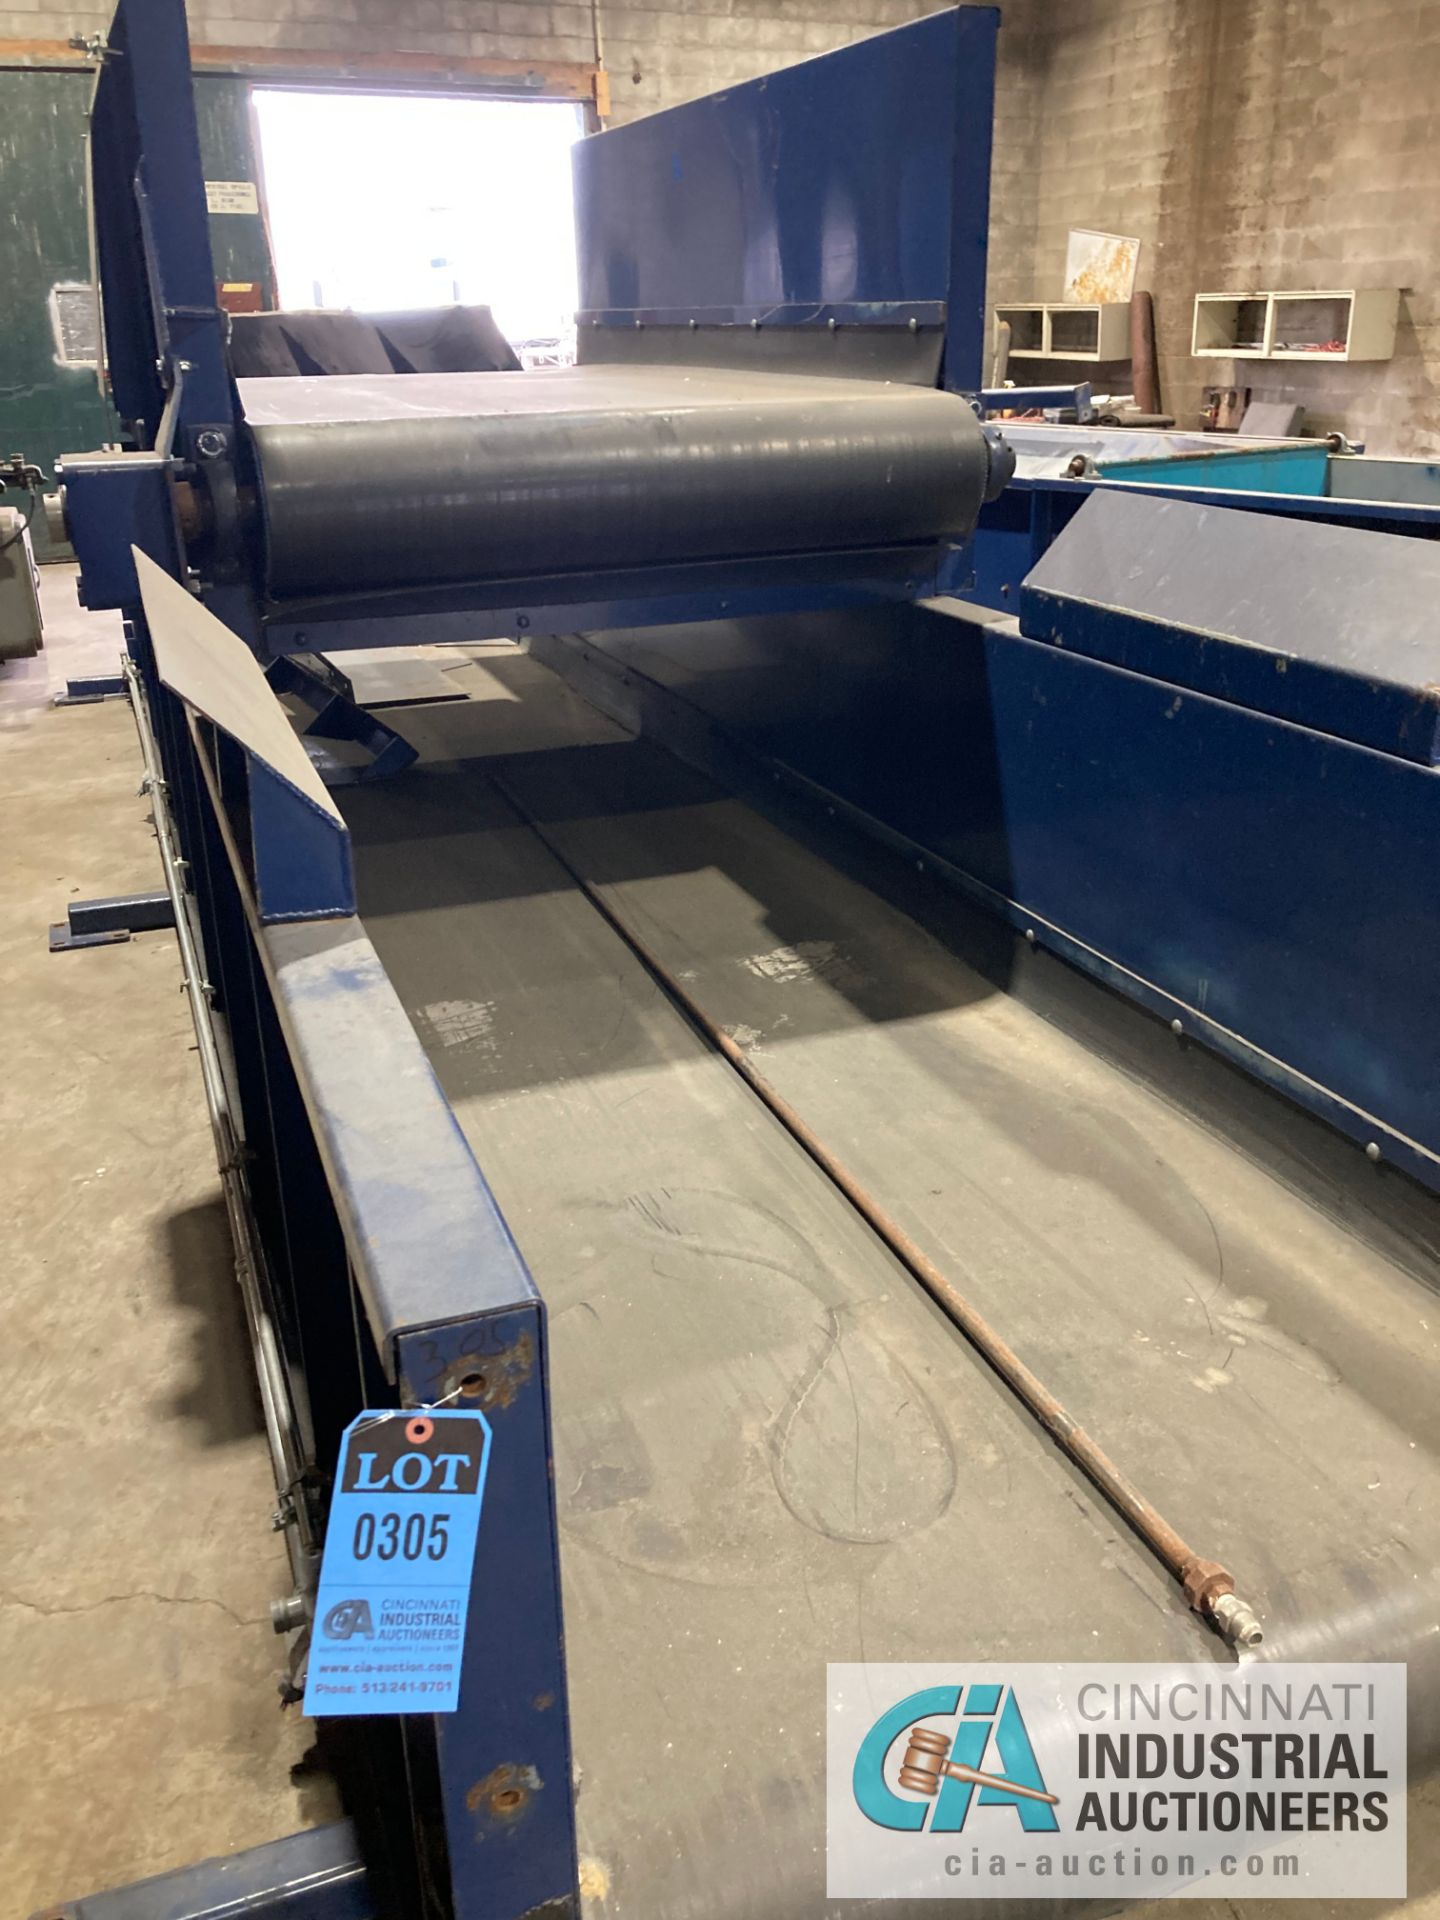 (LOT) 48" WIDE EZ-TRAX CONVEYOR, (3) SECTIONS WITH OVERALL LENGTH OF 80' - Image 2 of 8